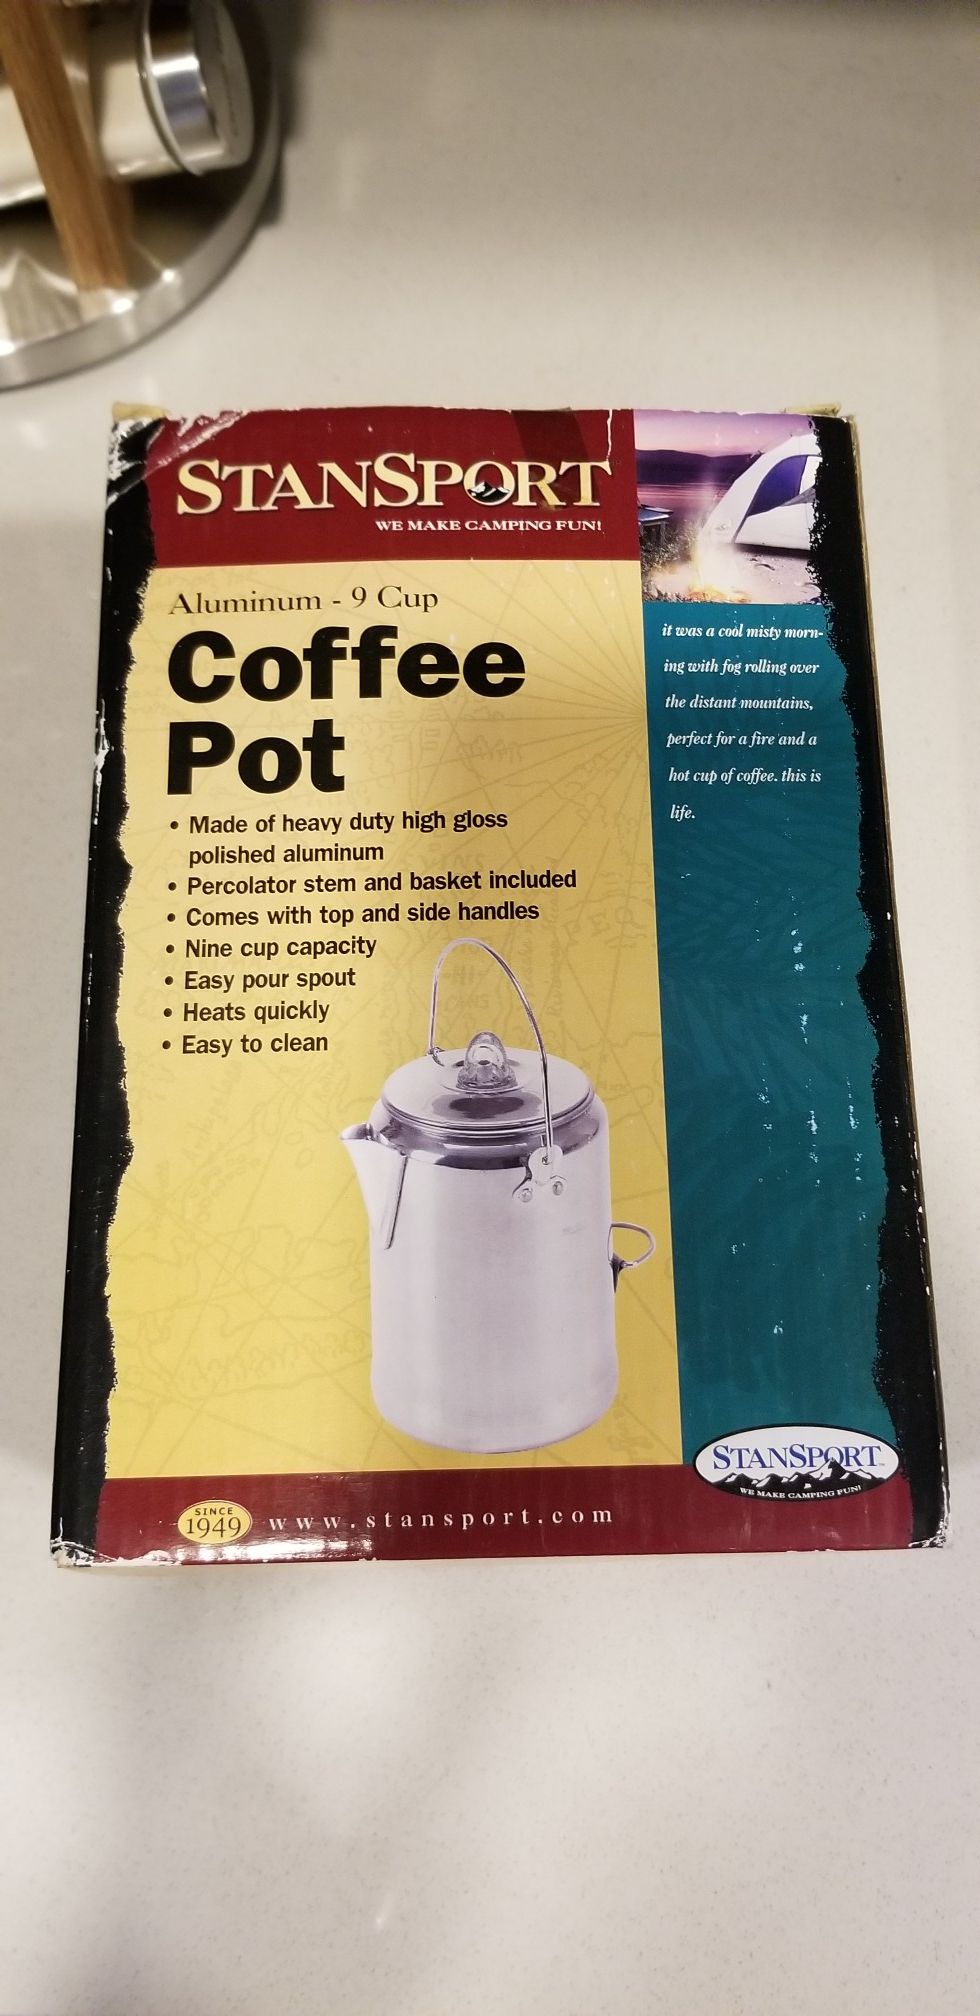 Coffee pot for camping